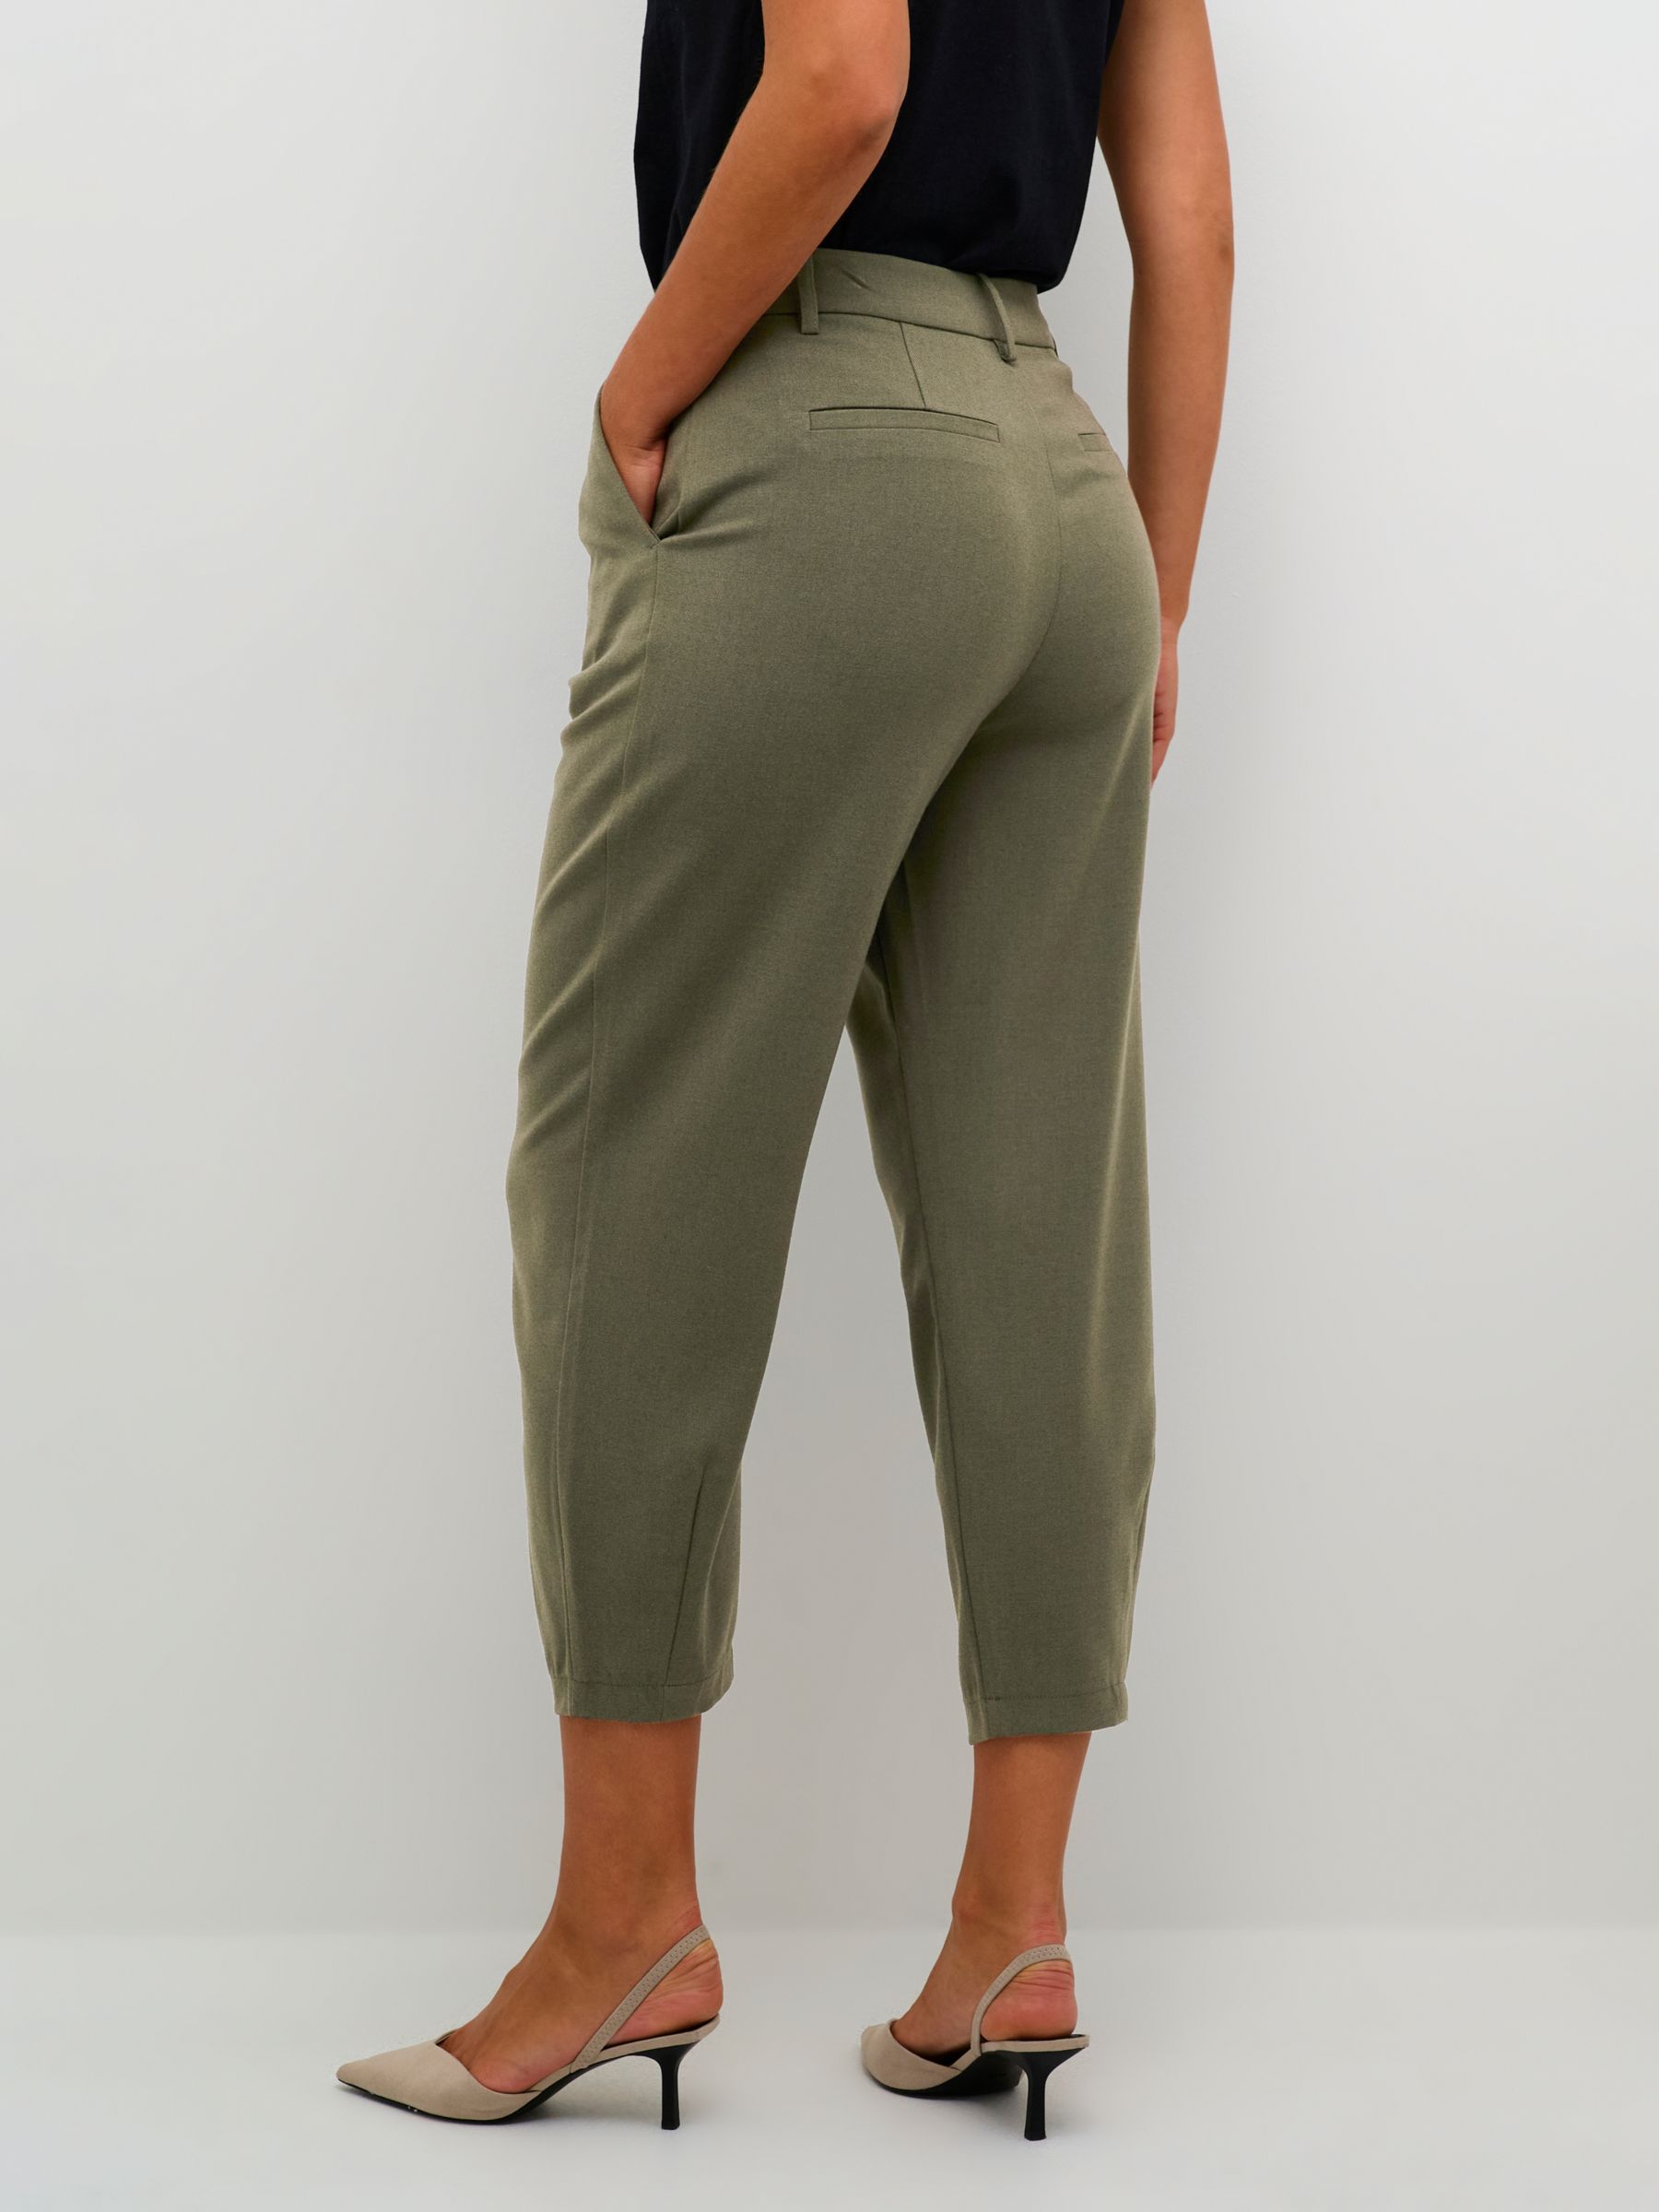 Buy KAFFE Merle Cropped Suit Trousers Online at johnlewis.com